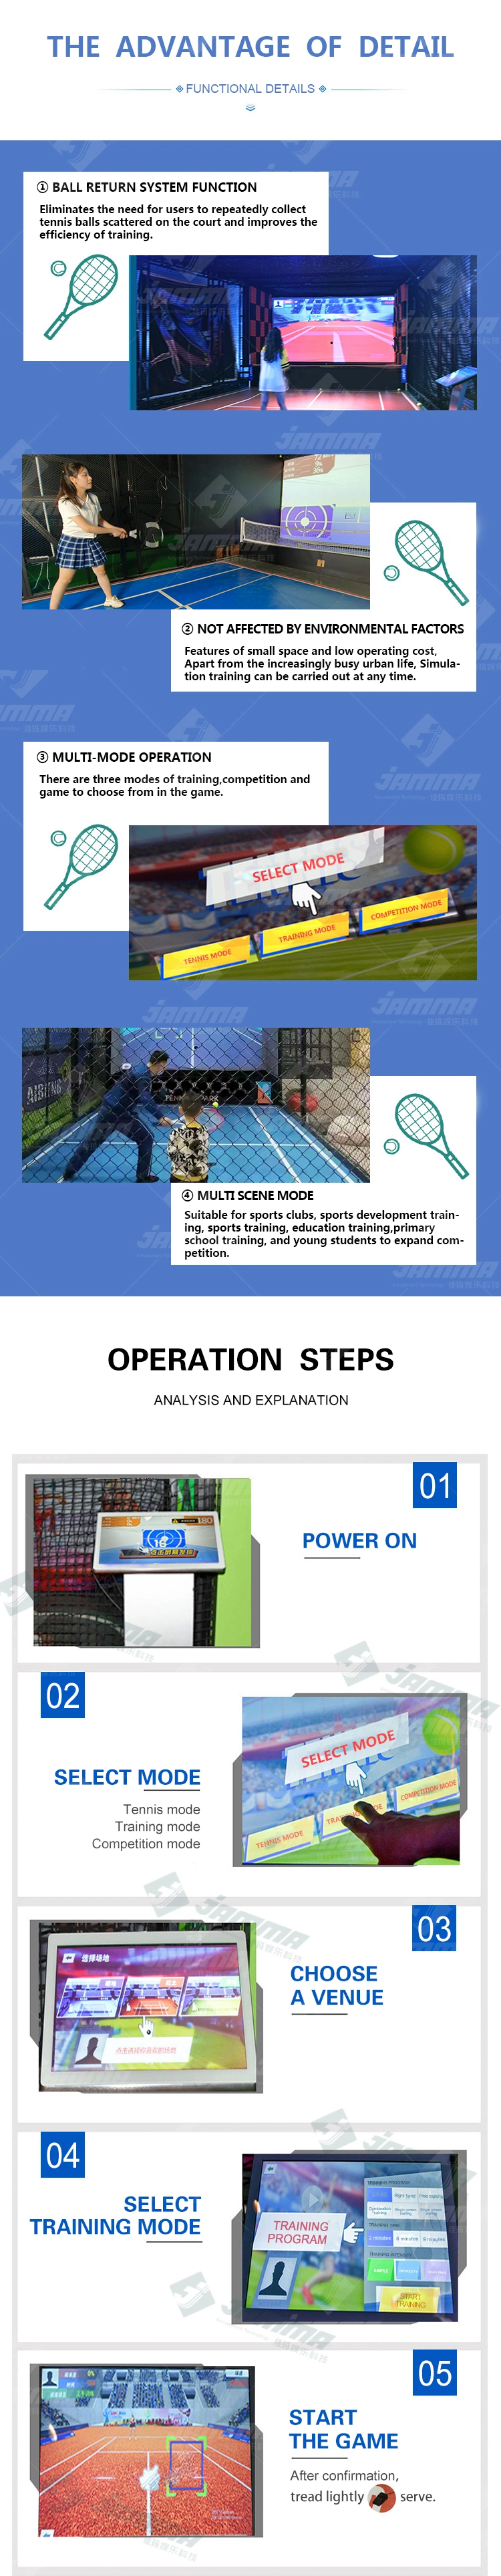 High Quality Augmented Reality Tennis Sports Game Multiplayer